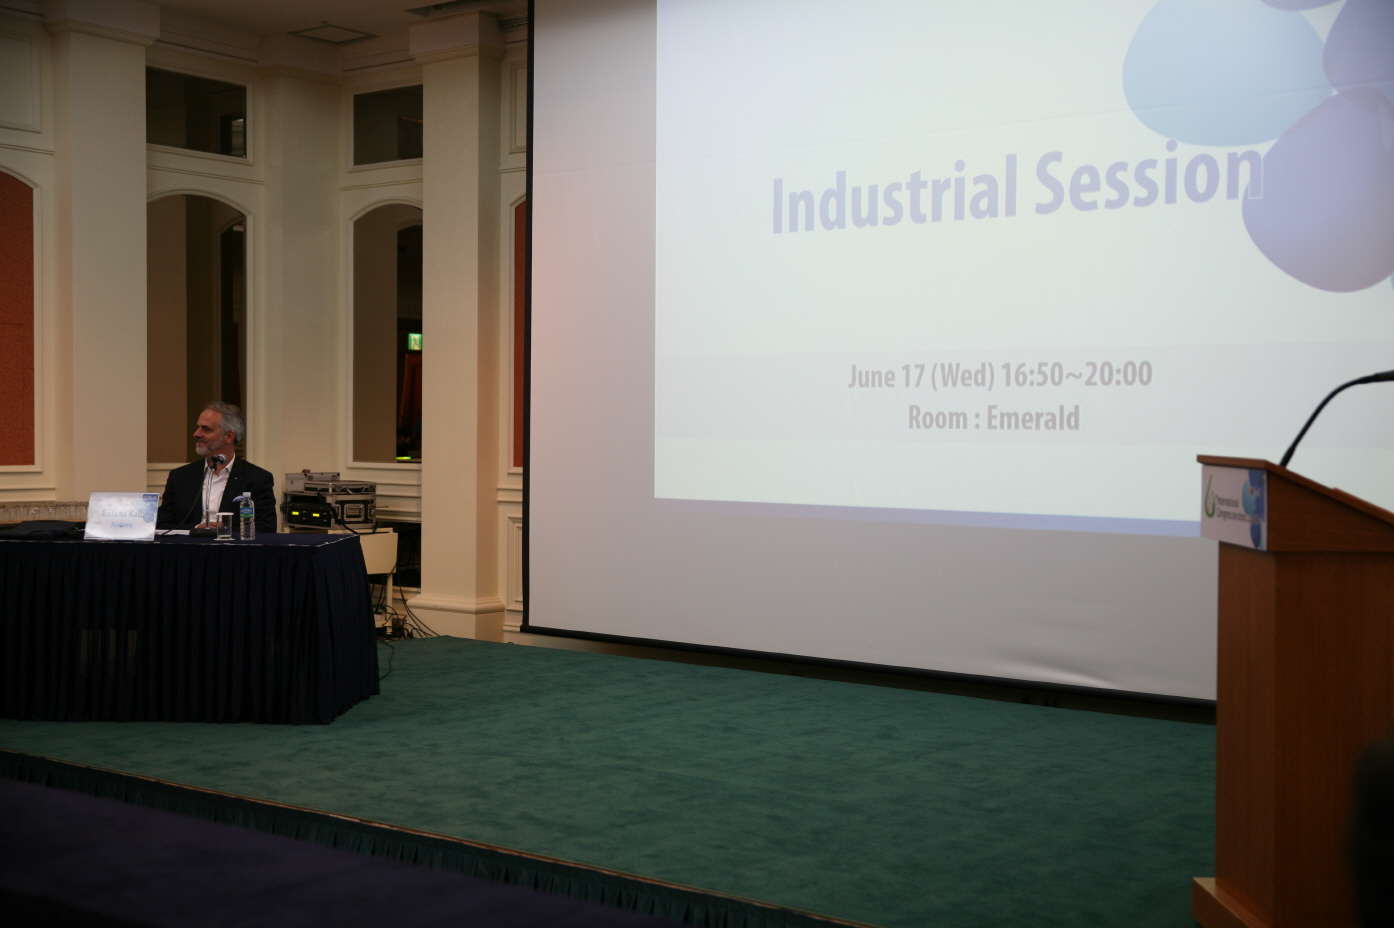 Day 17th - Industrial Session